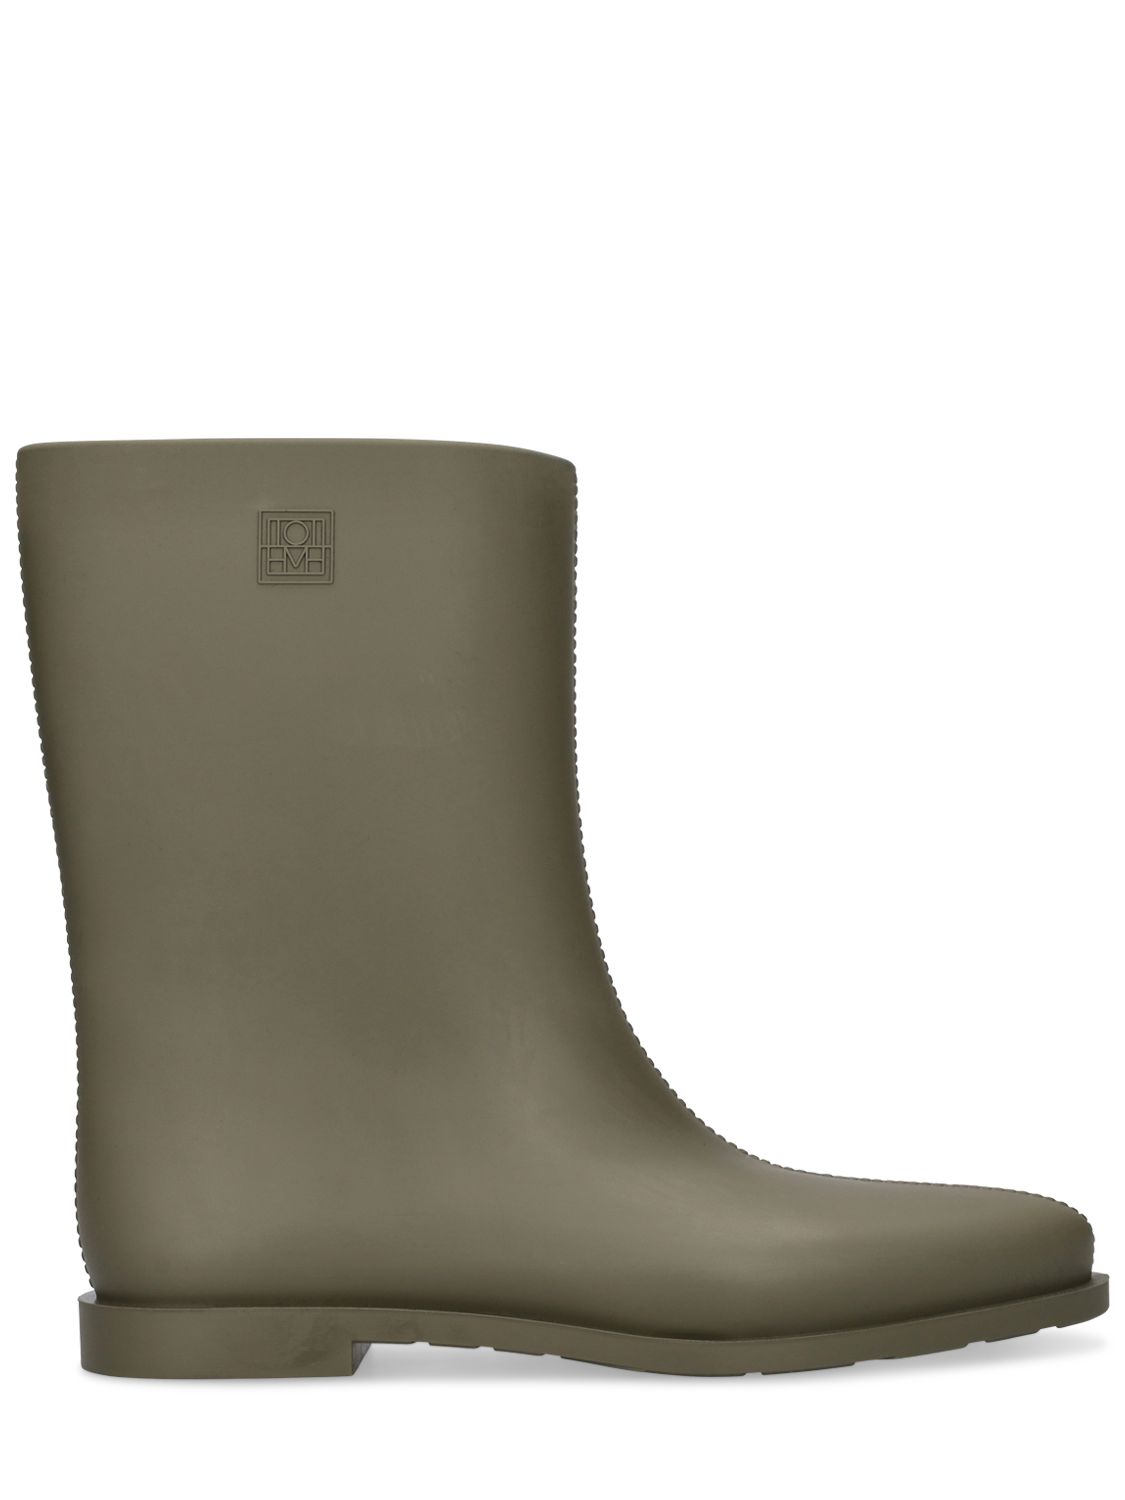 10mm The Rain Rubber Boots